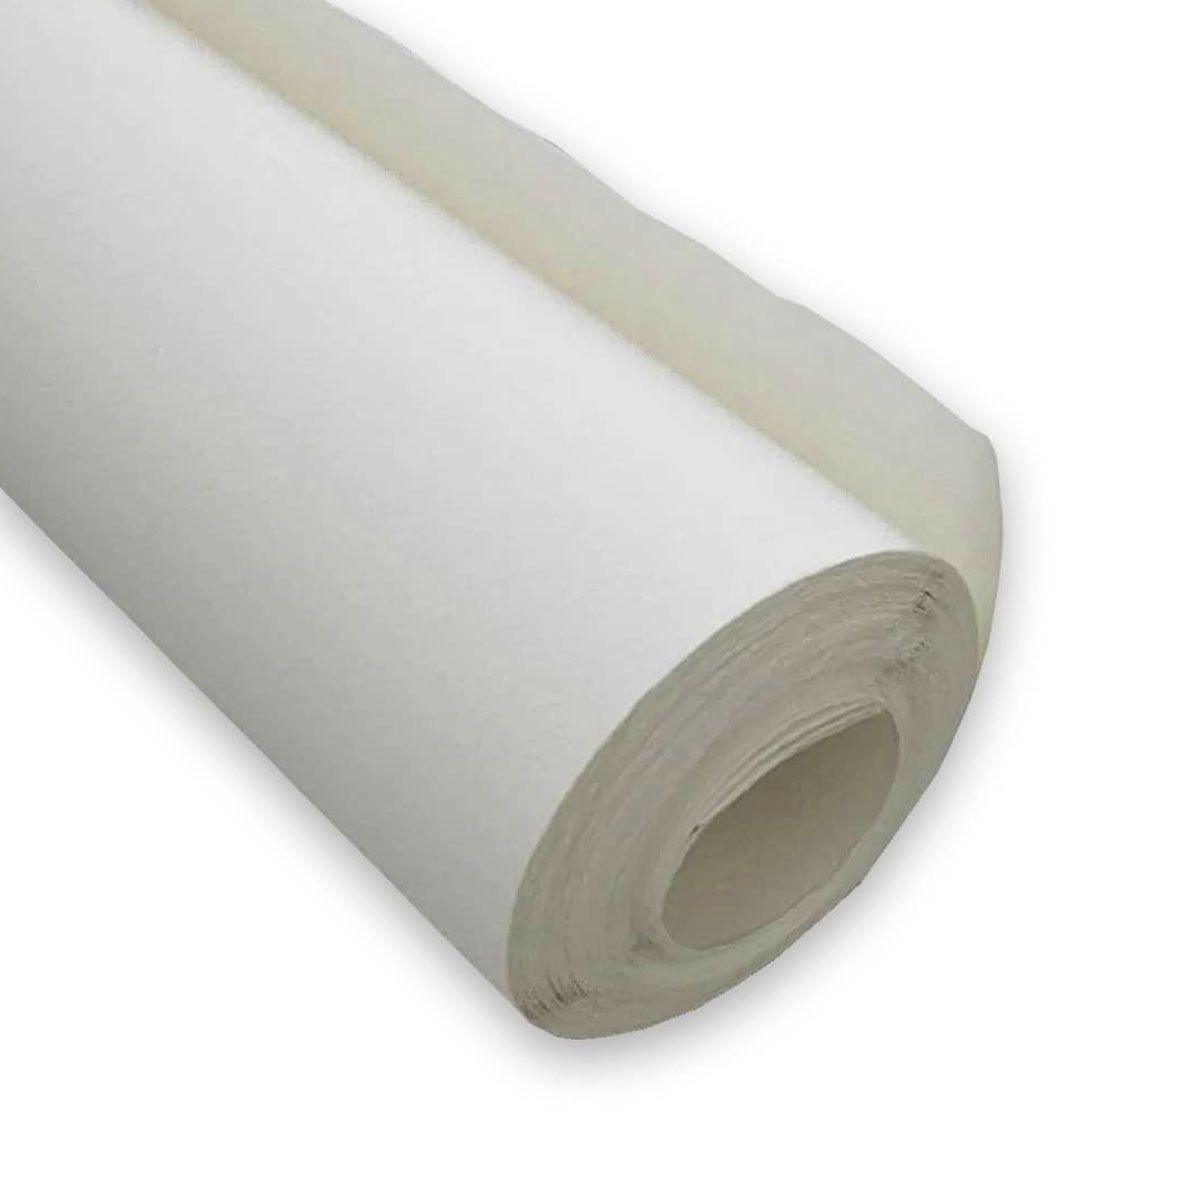 Waterford Watercolor Roll Hot Press, 140lb Roll, 10yd x 60"